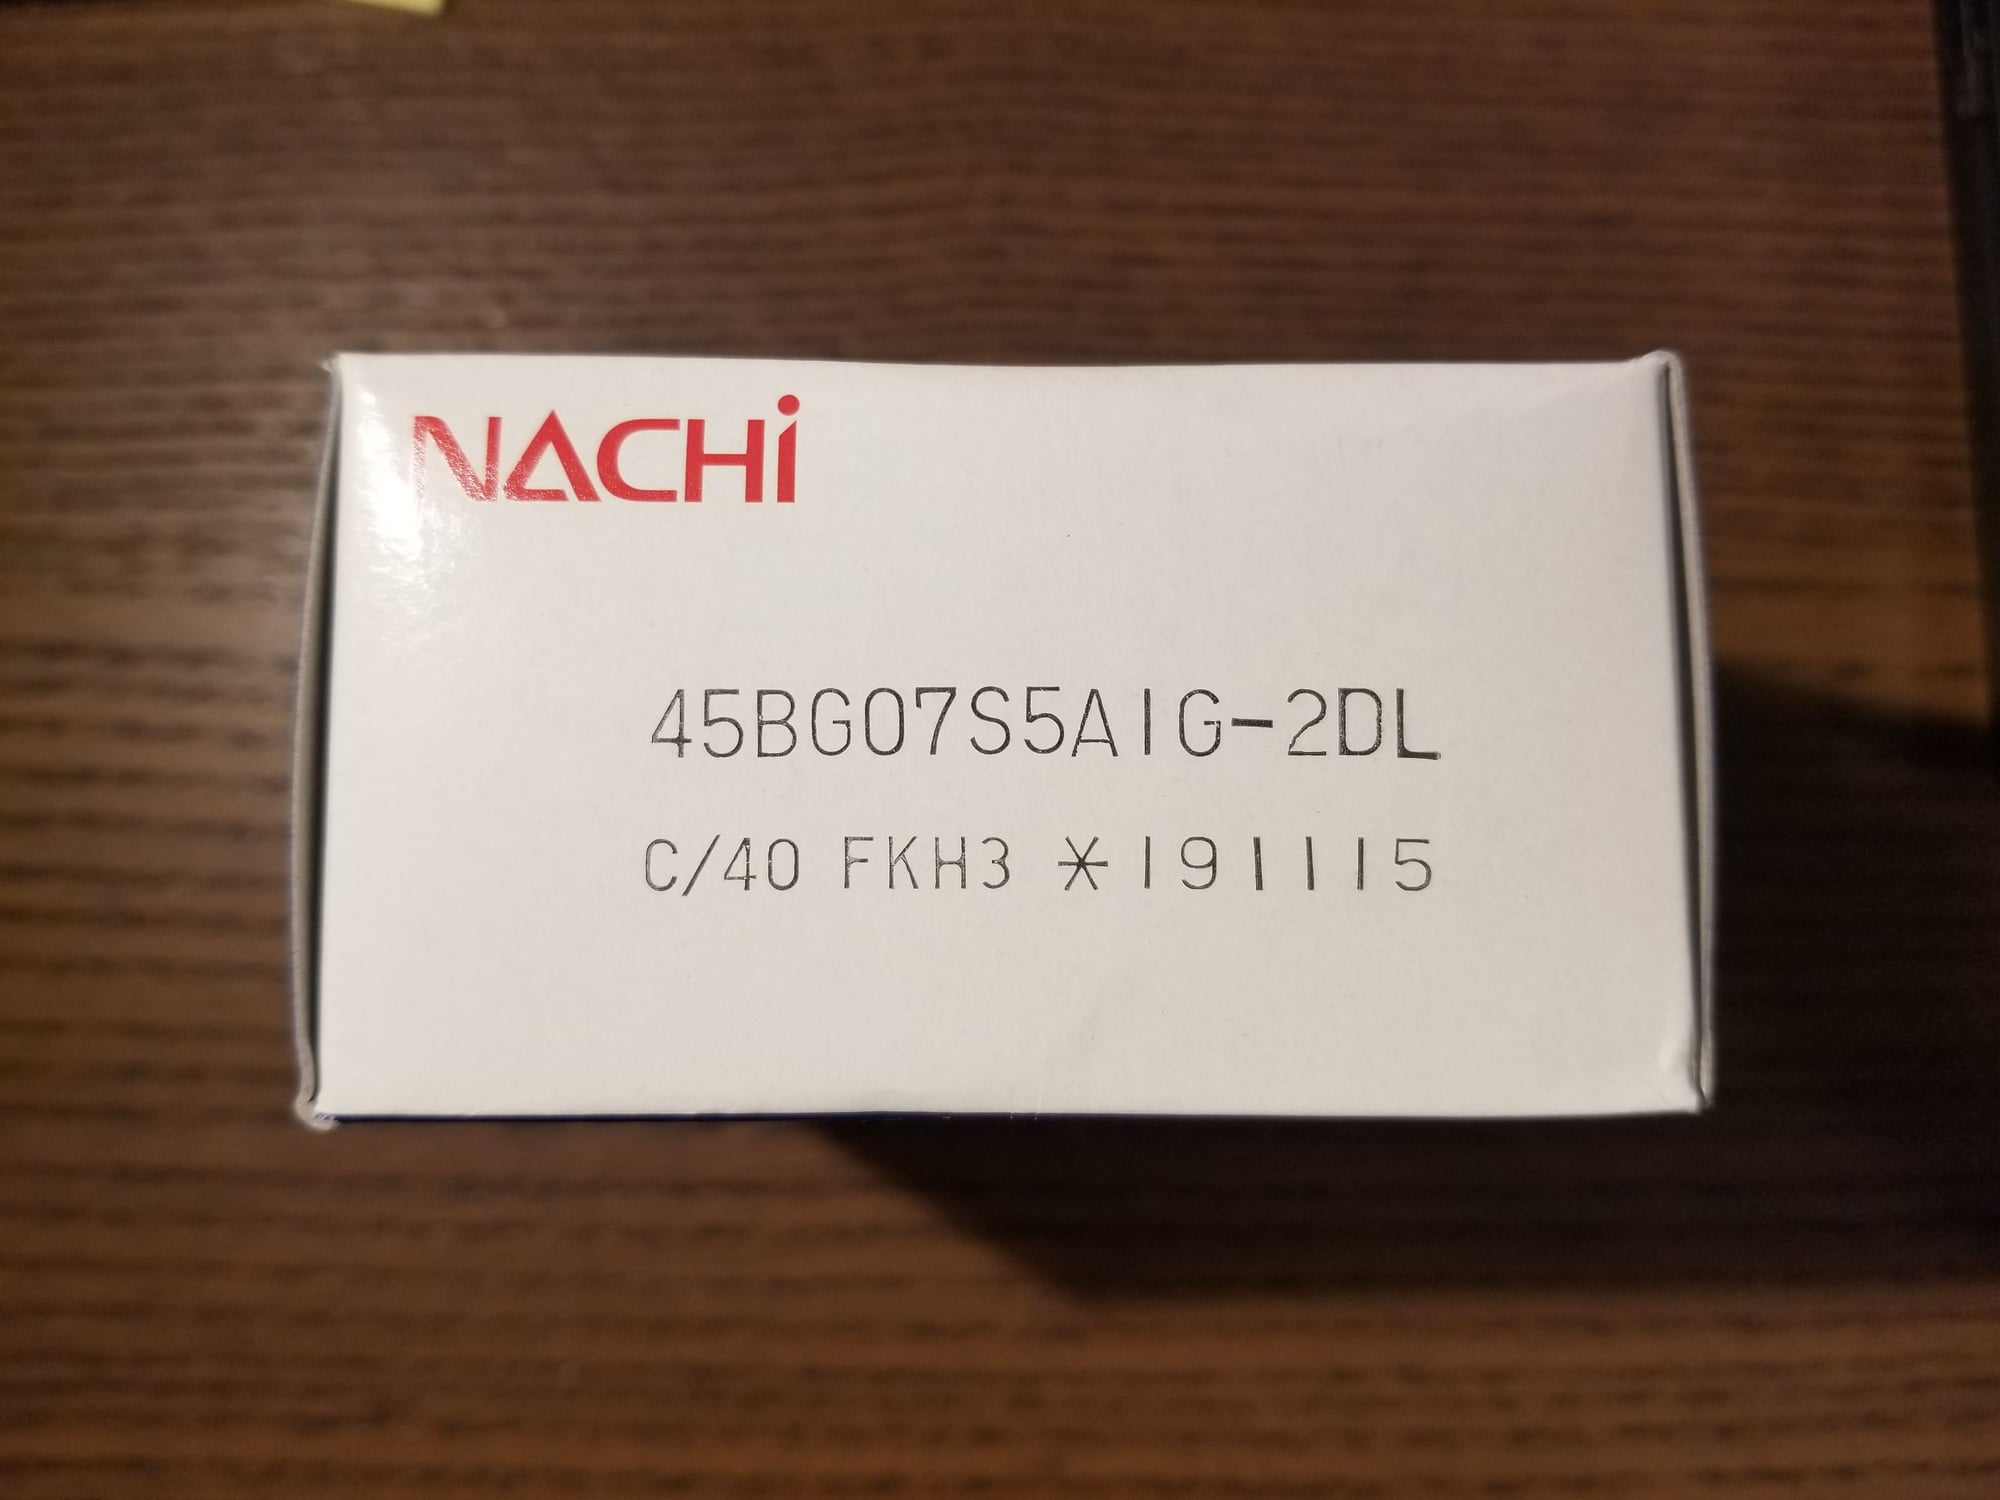 Miscellaneous - 45BG07S5A1G-2DL NACHI Supercharger Bearing for M113K with 2 Pulley Shims - New - 0  All Models - New York, NY 10011, United States